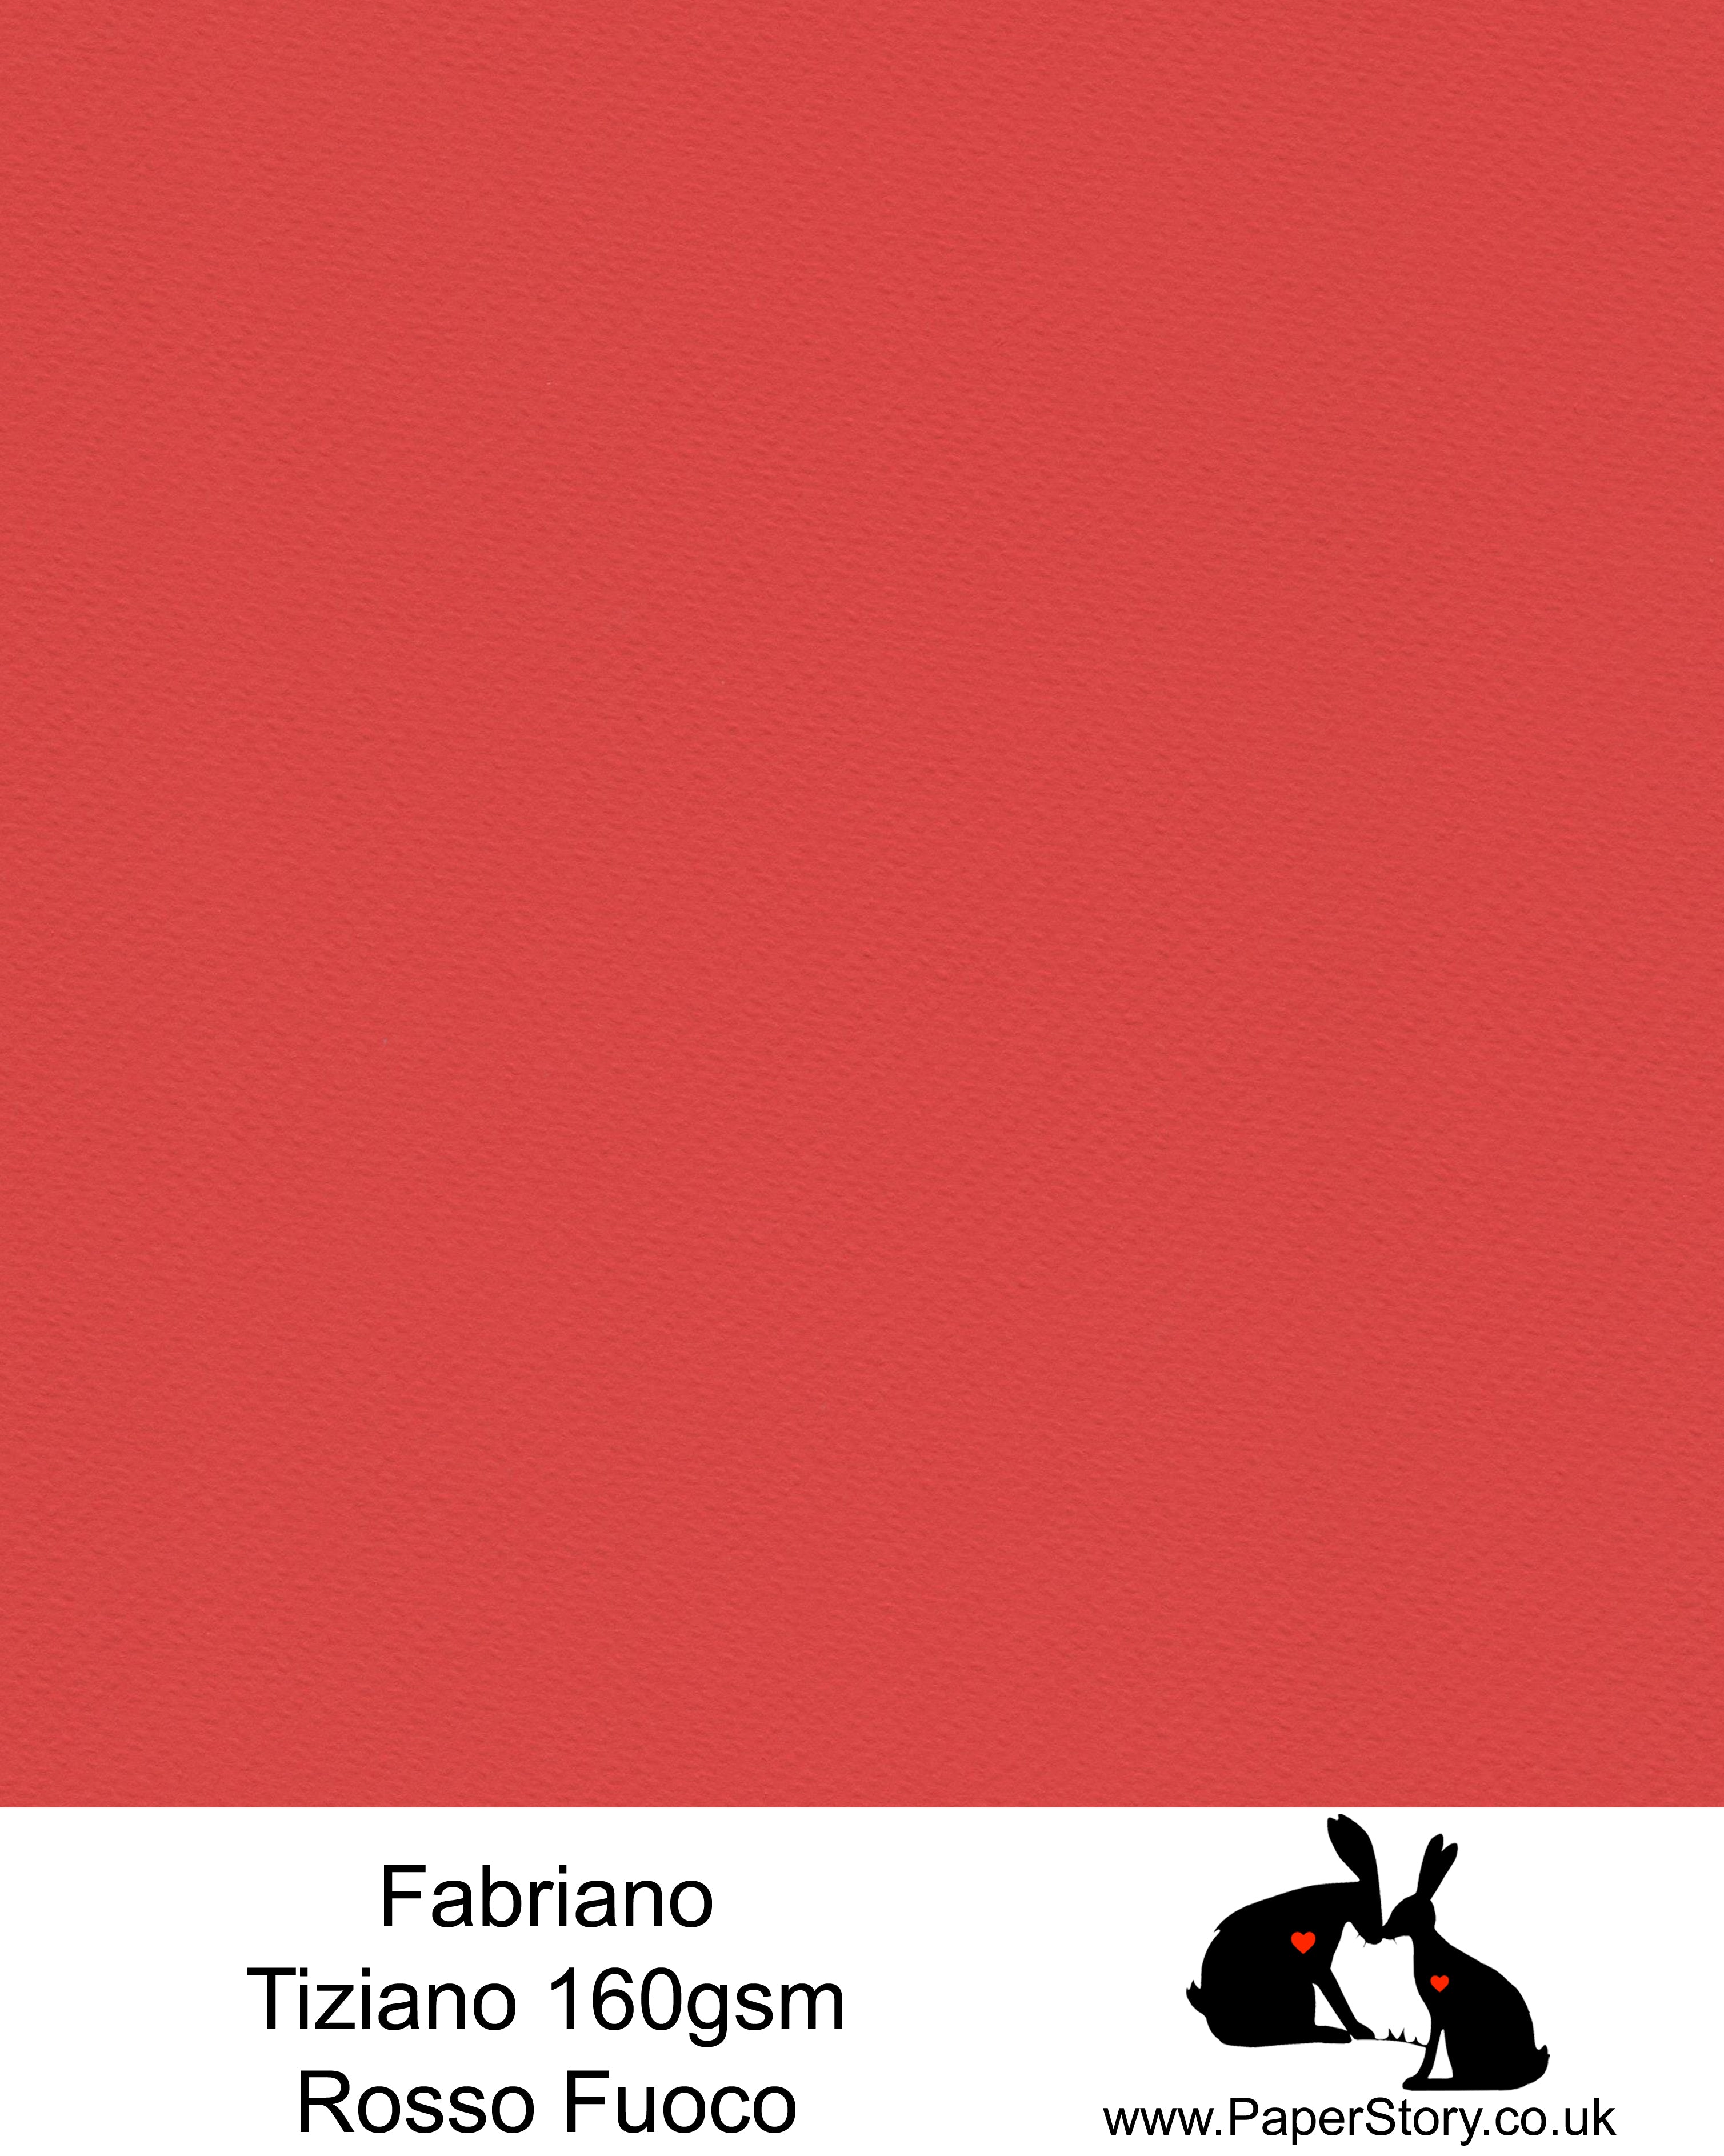 High quality paper from Italy, Rosso Fuoco (Fire Red) Fabriano Tiziano is 160 gsm, Tiziano has a high cotton content, a textured naturally sized surface. This paper is acid free to guarantee long permanence in time, pH neutral. It has highly lightfast colours, an excellent surface making and sizing which make this paper particularly suitable for papercutting